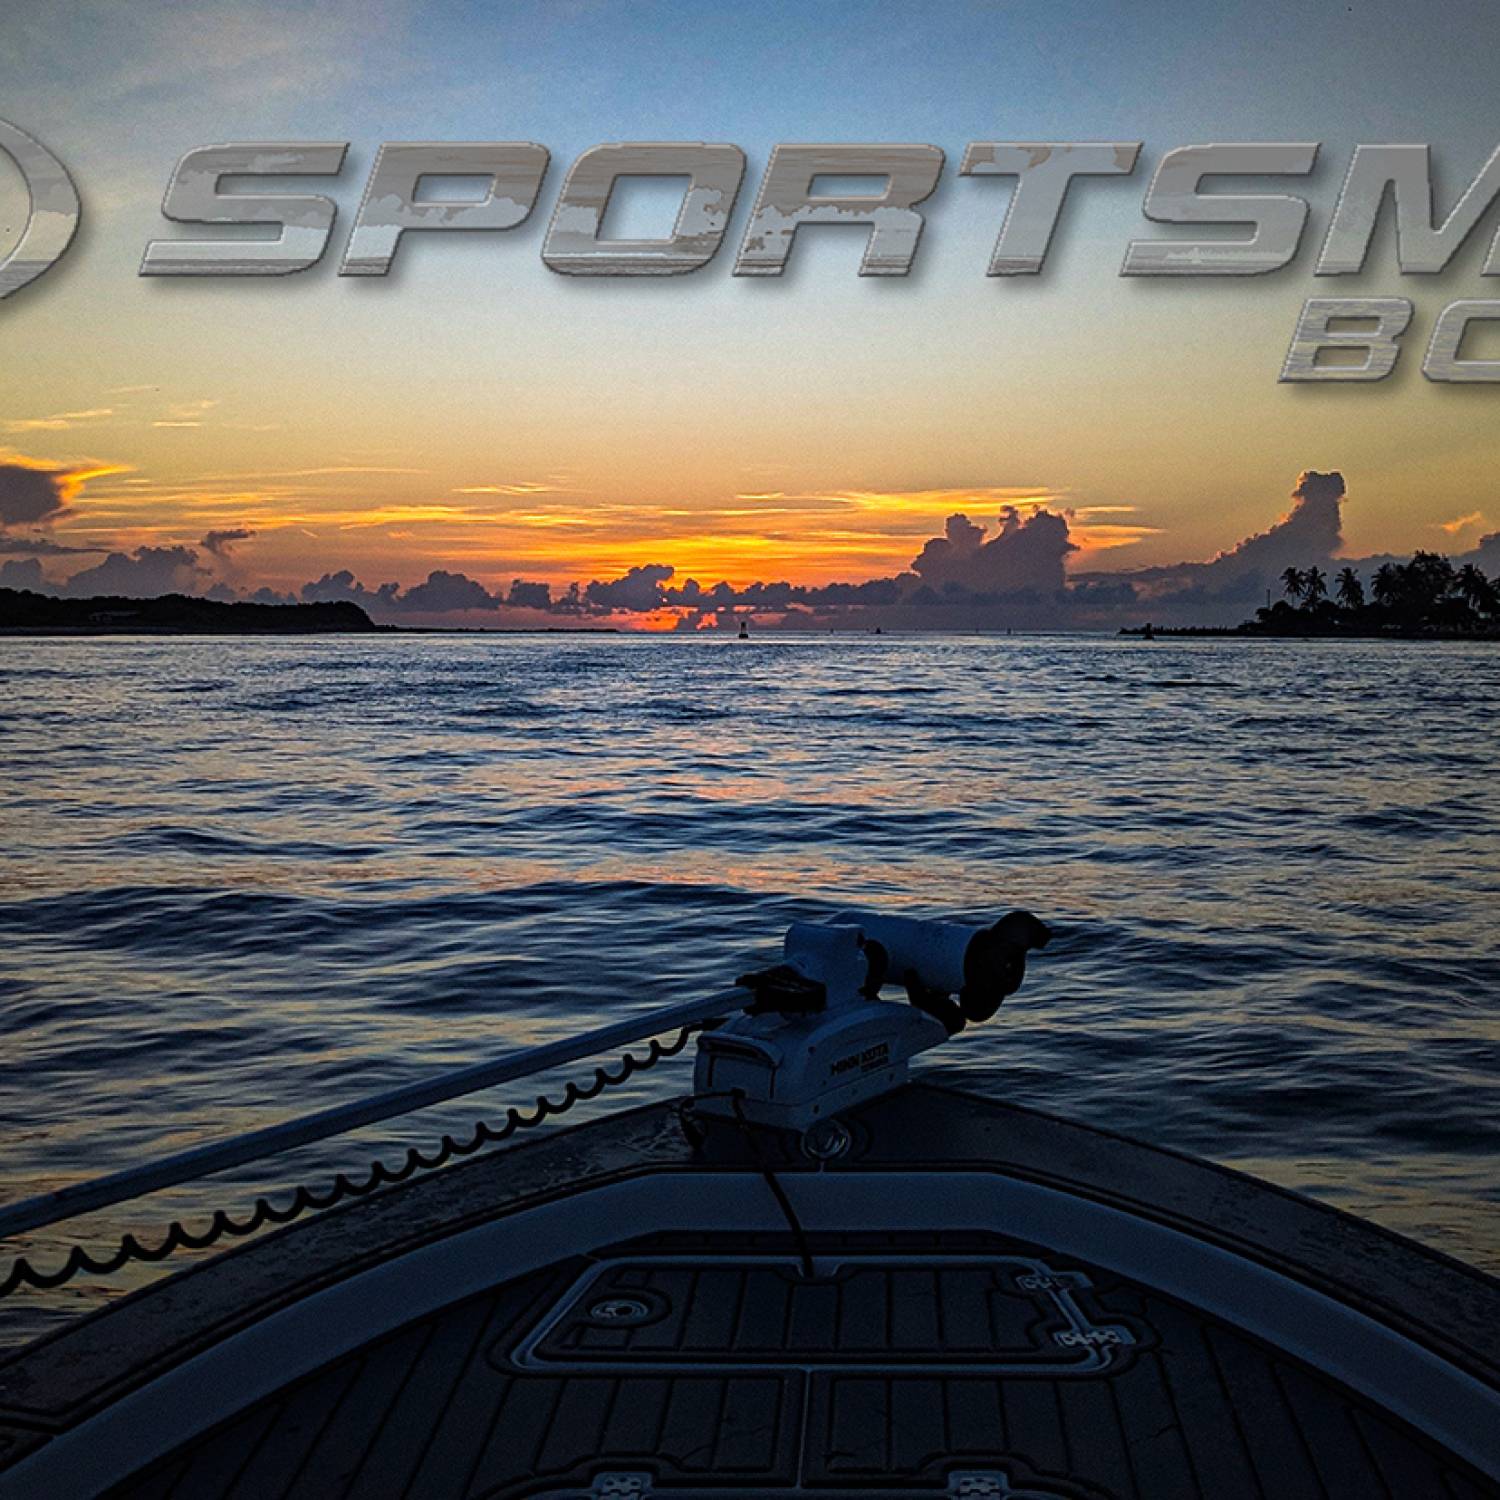 Title: Awakening - On board their Sportsman Masters 227 Bay Boat - Location: Ft. Pierce. Participating in the Photo Contest #SportsmanAugust2023